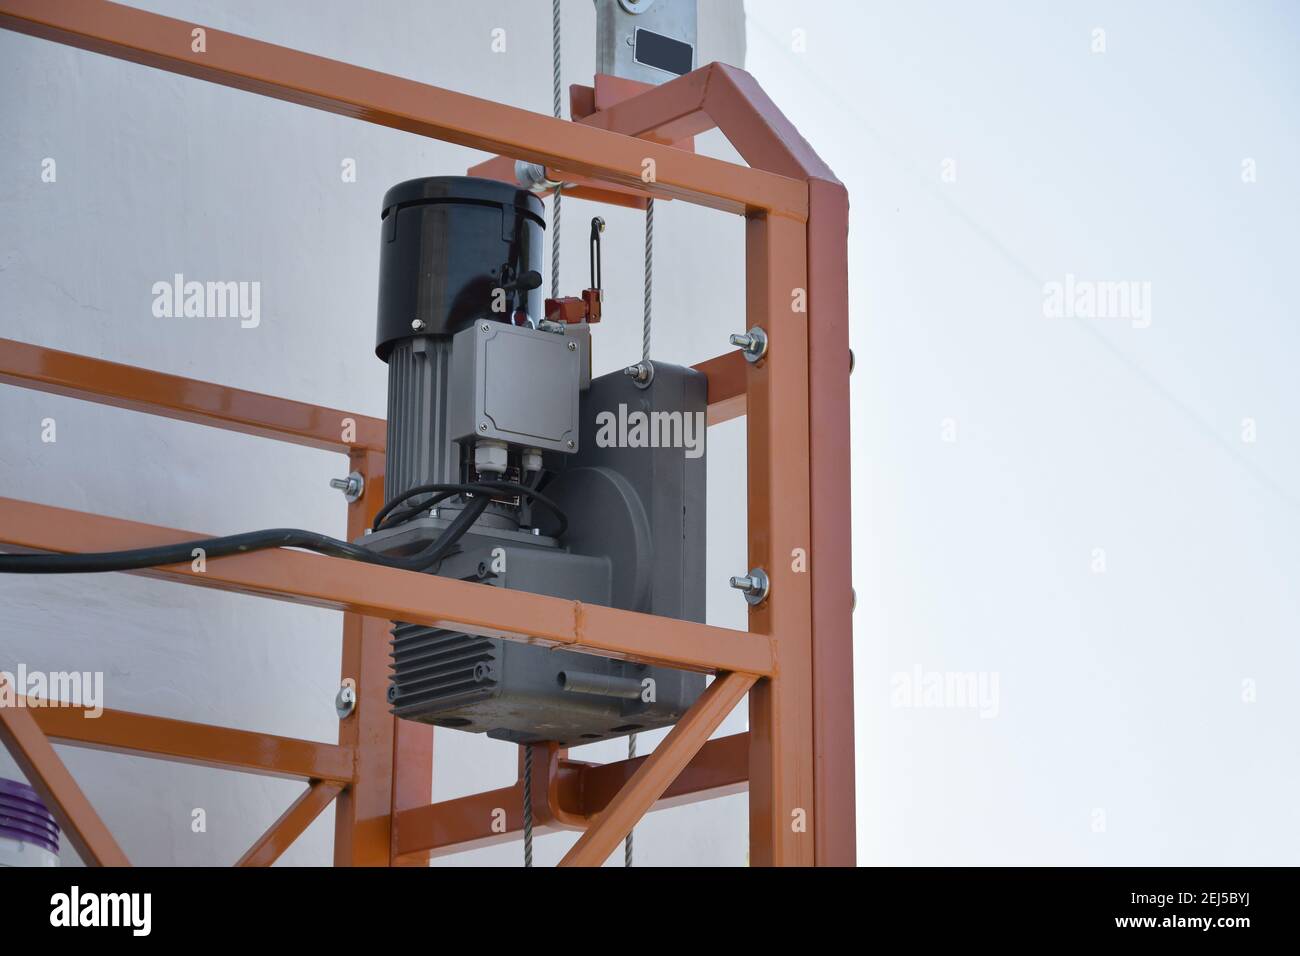 Hoist supply and safety lock as part of suspended wire rope platform for facade works on high multistorey buildings. Hoist for elevation, raising or l Stock Photo